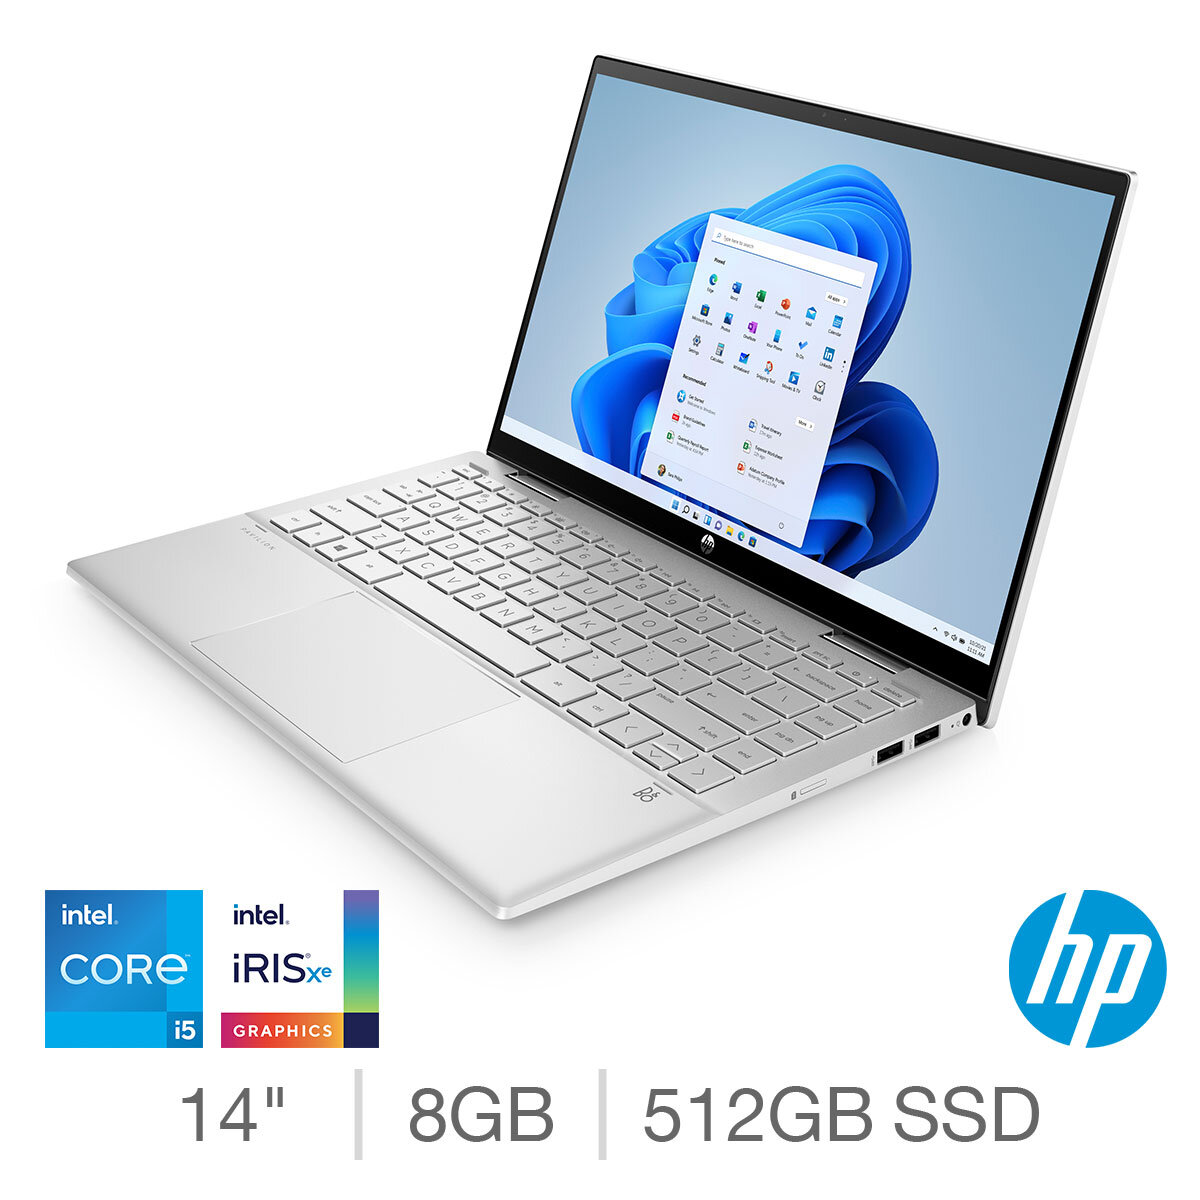 Buy HP Pavilion, Intel Core i5, 8GB RAM, 512GB SSD,14 Inch Laptop, 14-dy0034na at costco.co.uk